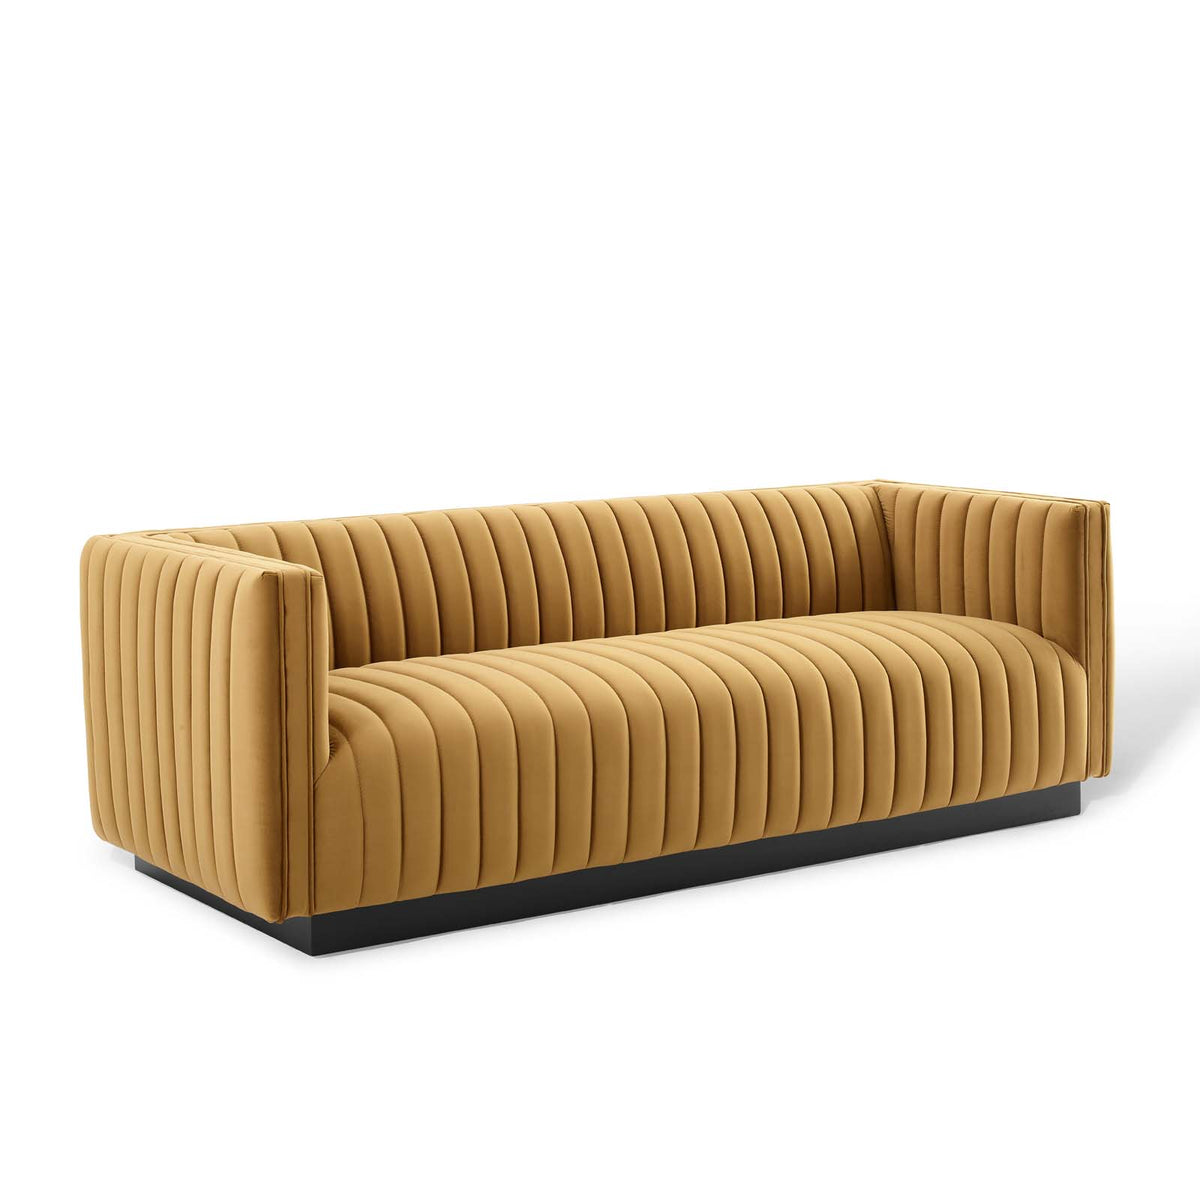 Chic Channeled Sofa